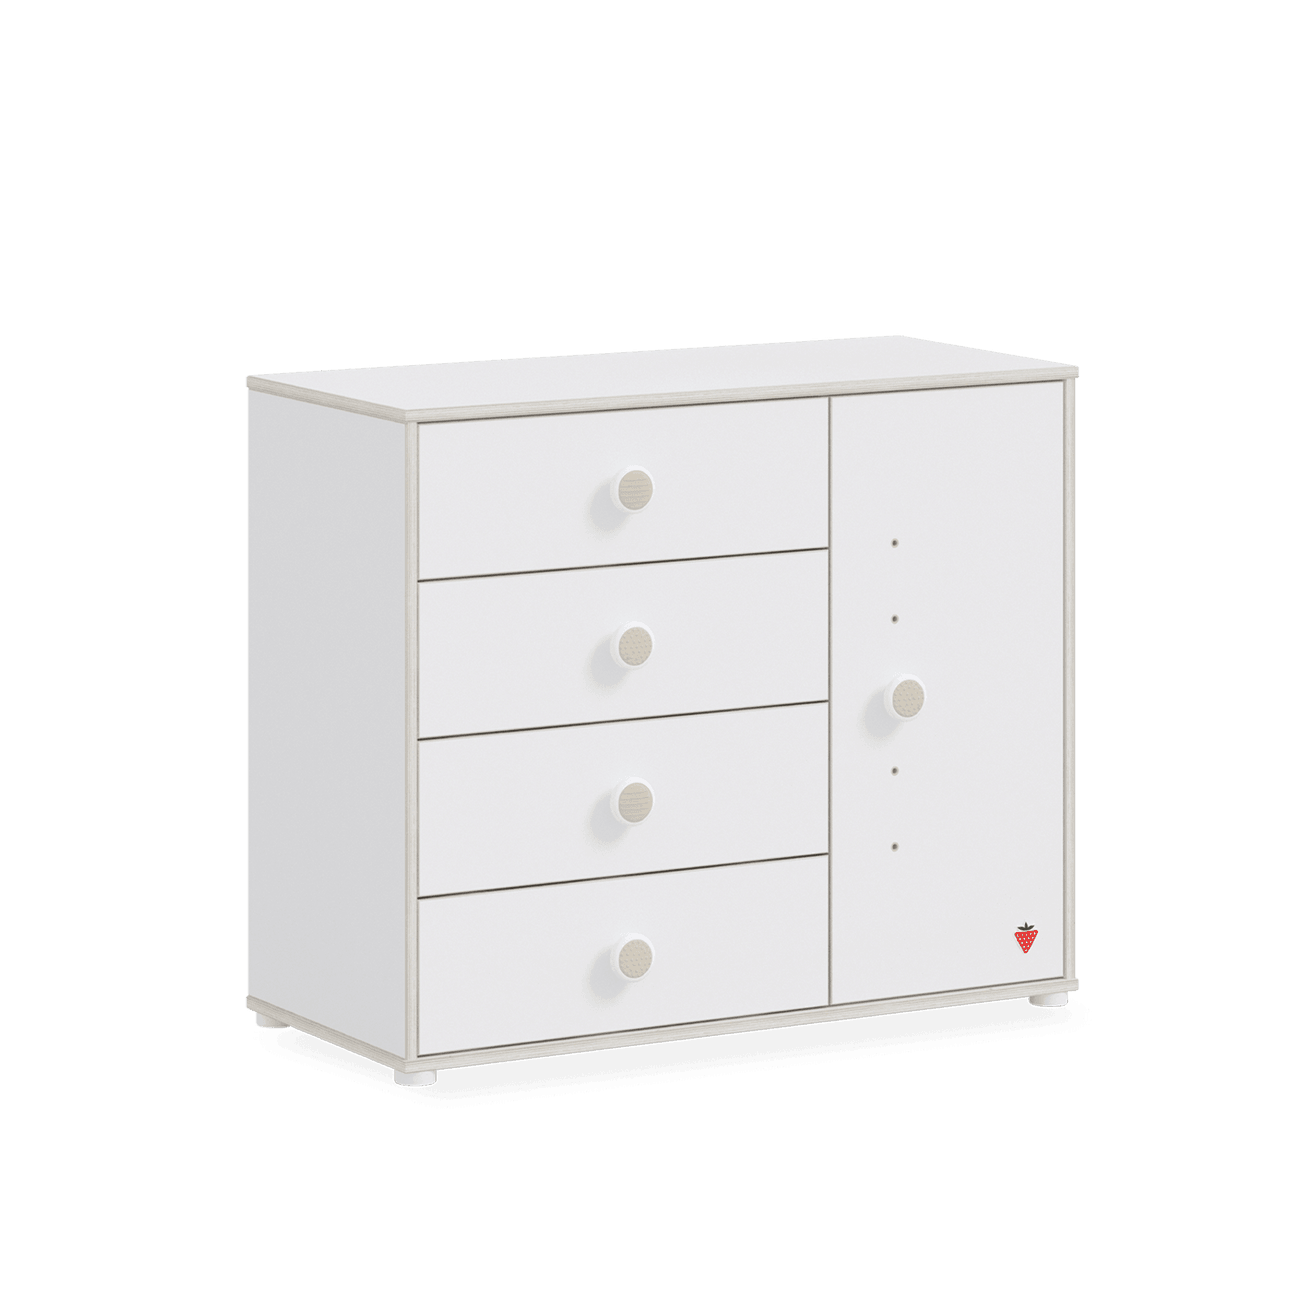 Cilek Montes White Dresser with Cover - Kids Haven